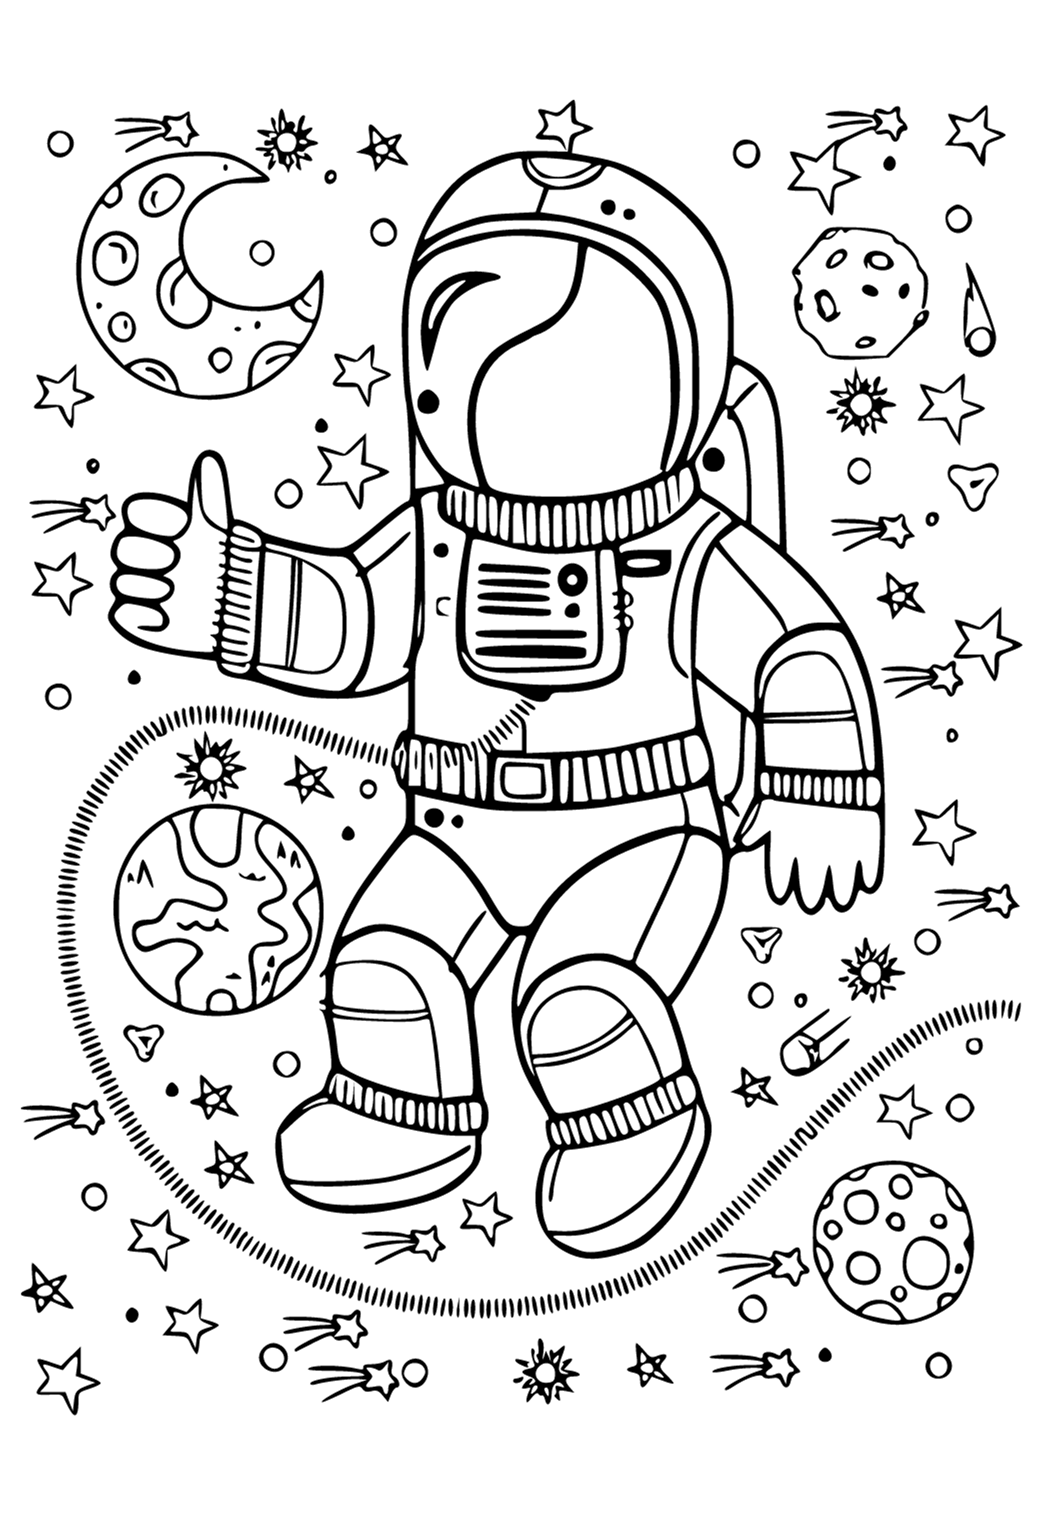 Astronot